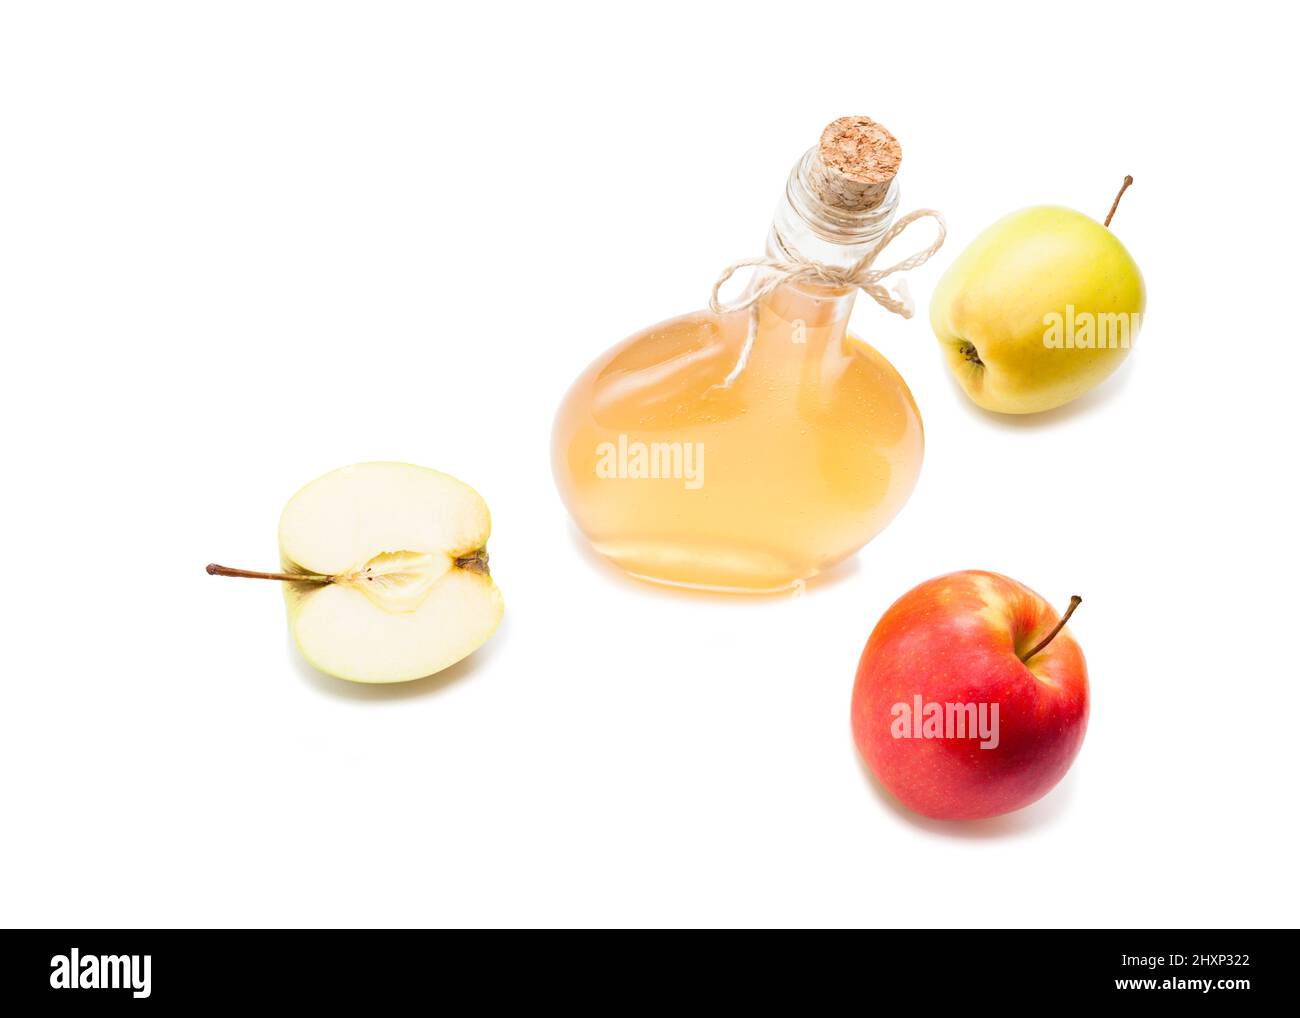 Homemade fermented vinegar with apples isolated on white top view Stock Photo